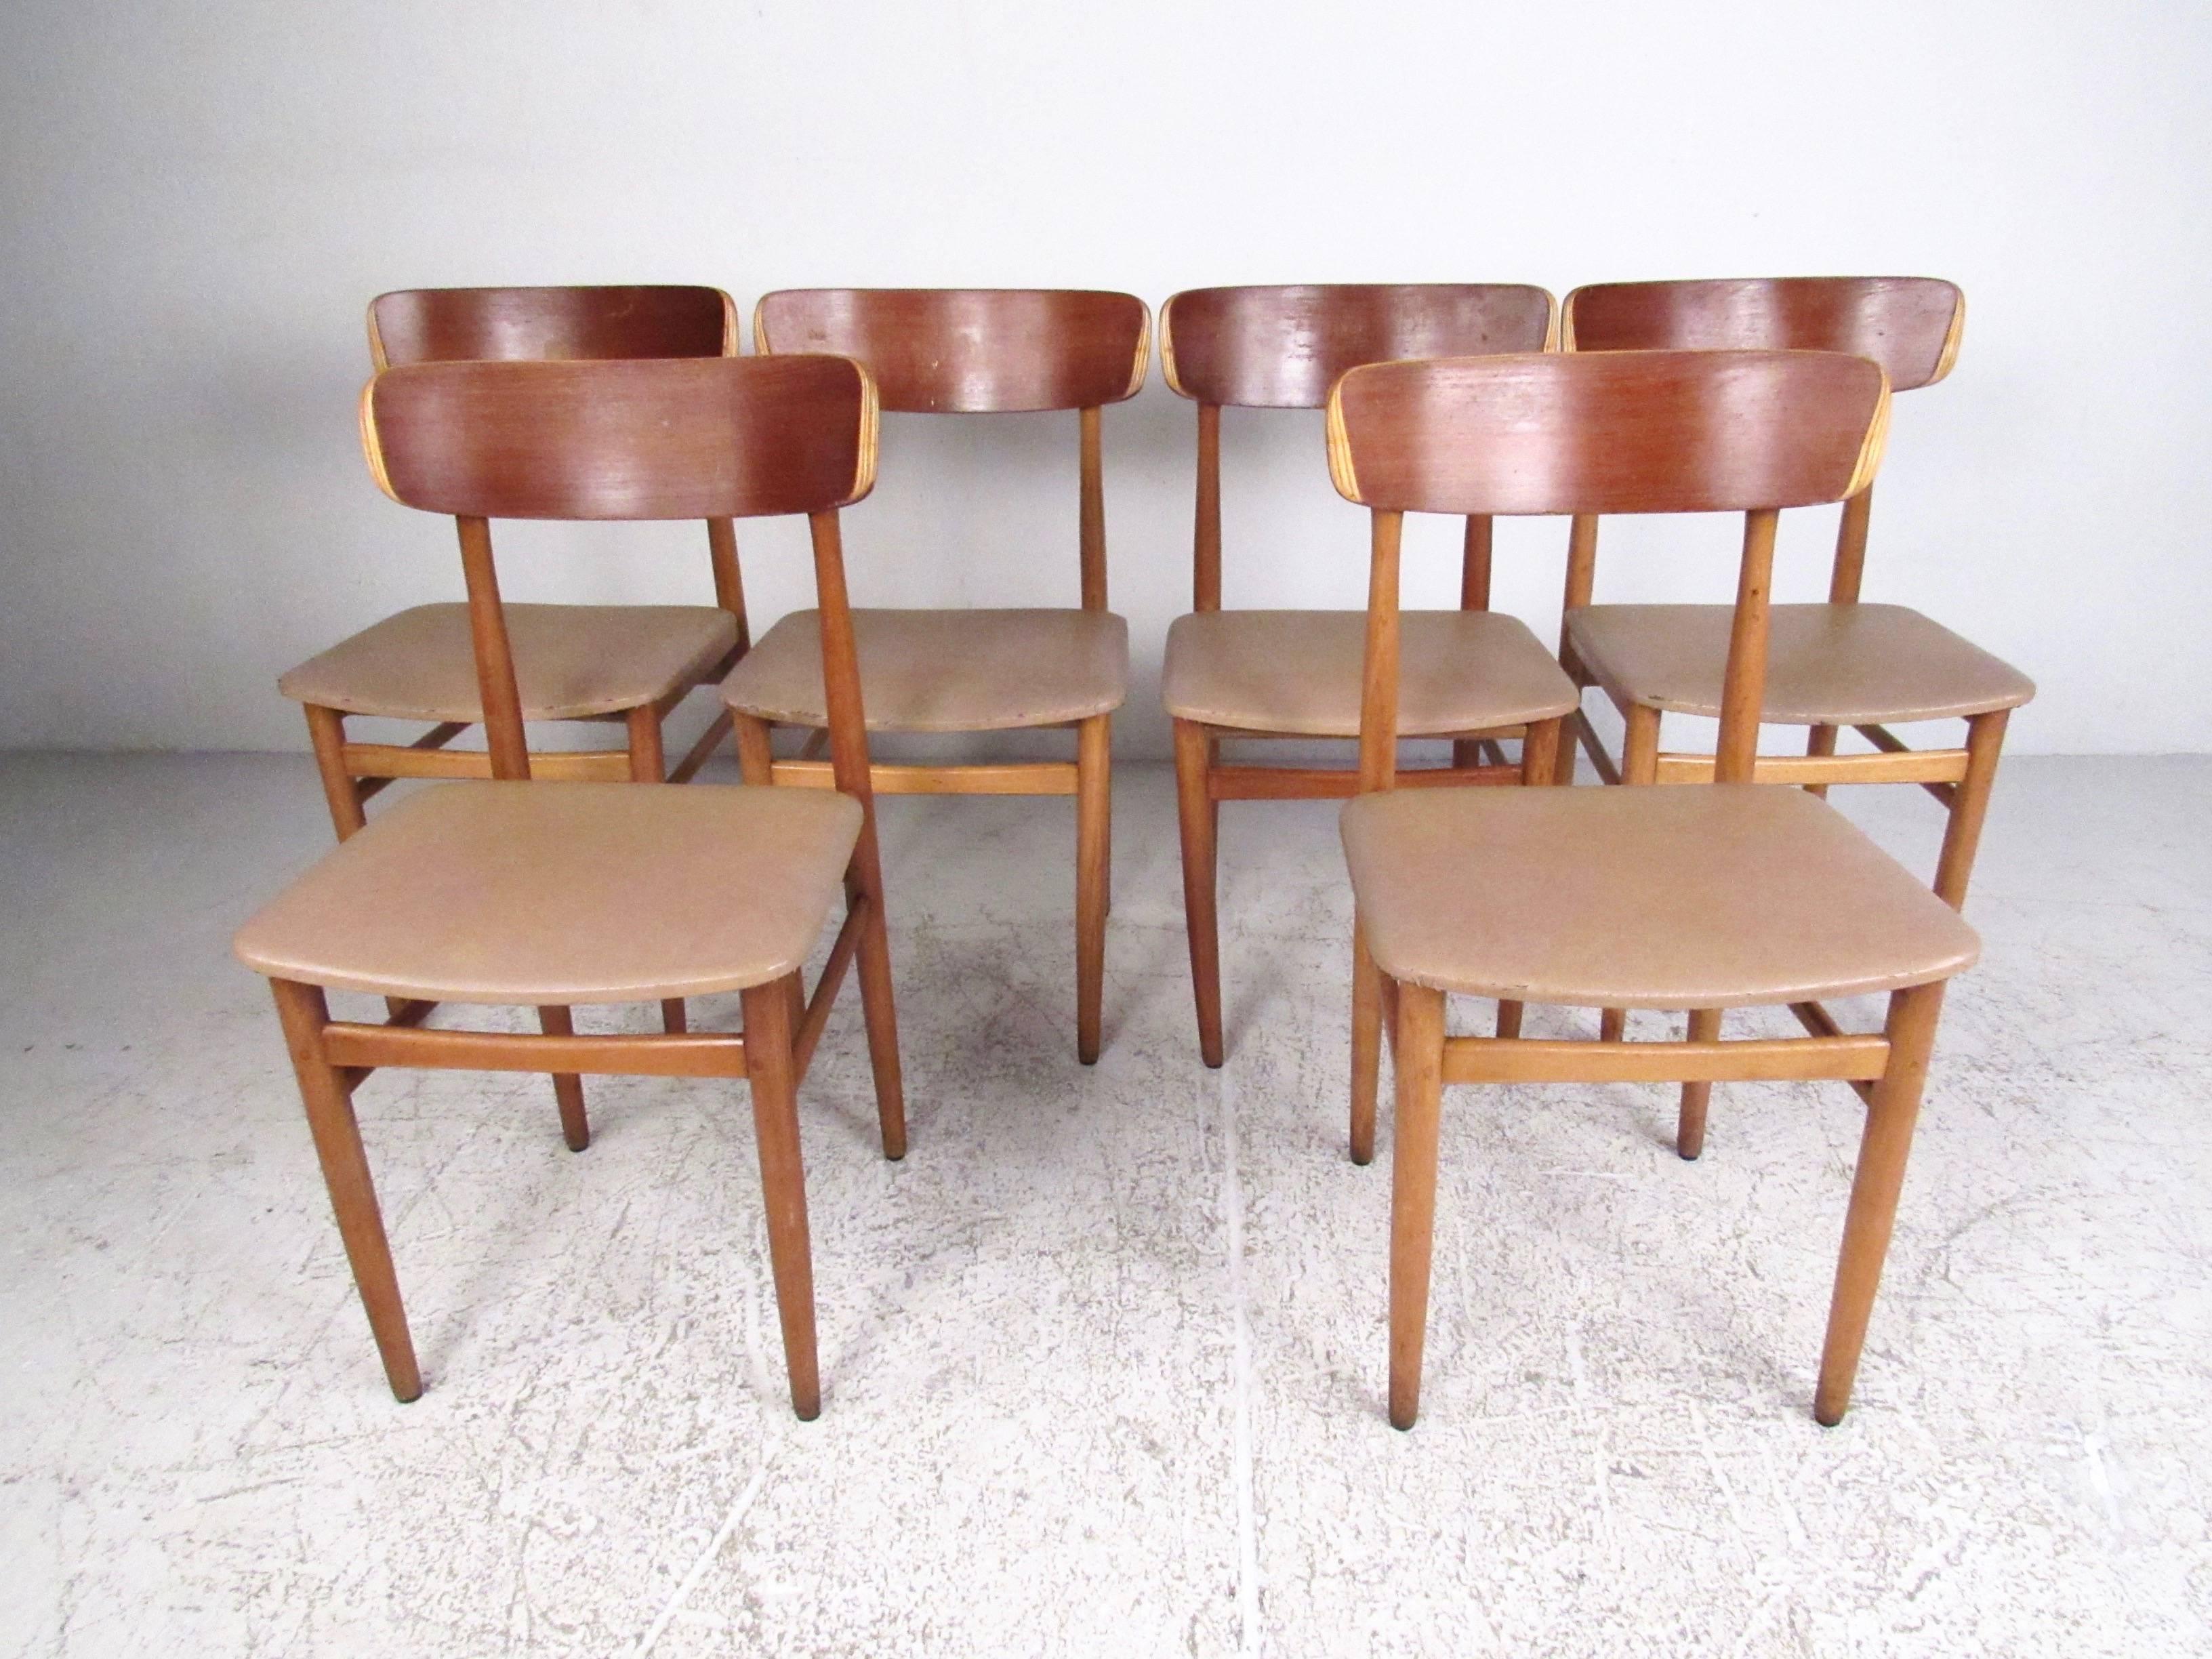 This stylish set of Scandinavian style dining chairs features vinyl seats, hardwood frames, and clean modern design. Simple yet comfortable midcentury chairs make a unique addition to home or business. Please confirm item location (NY or NJ).